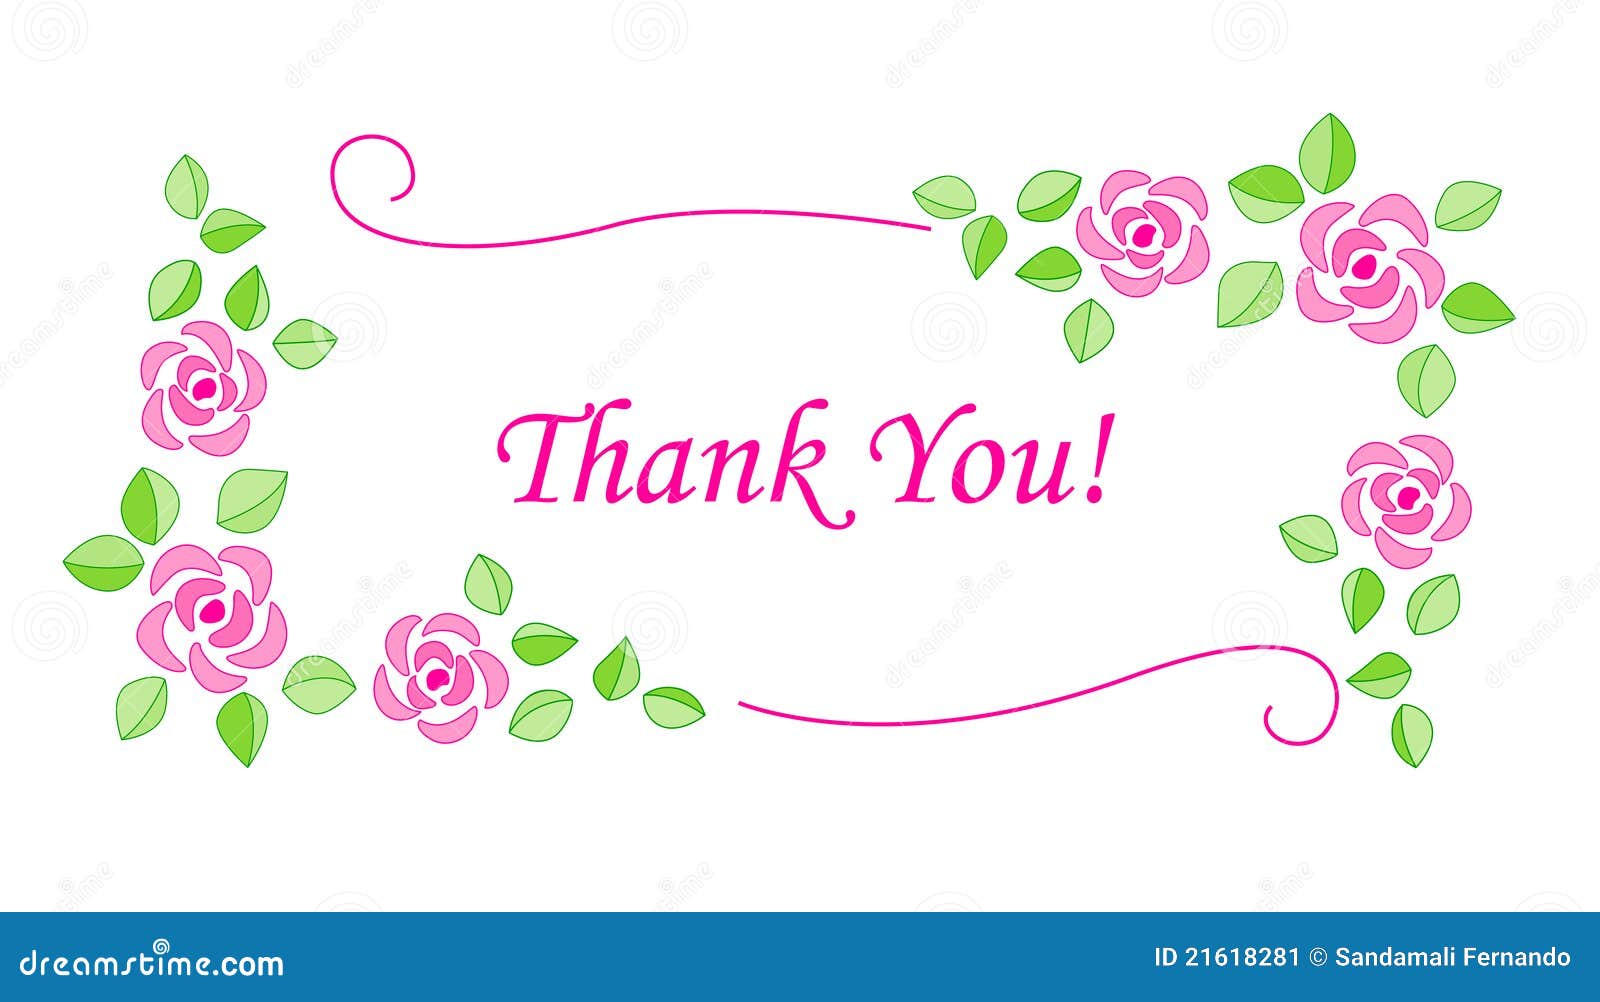 clipart thank you flowers - photo #23